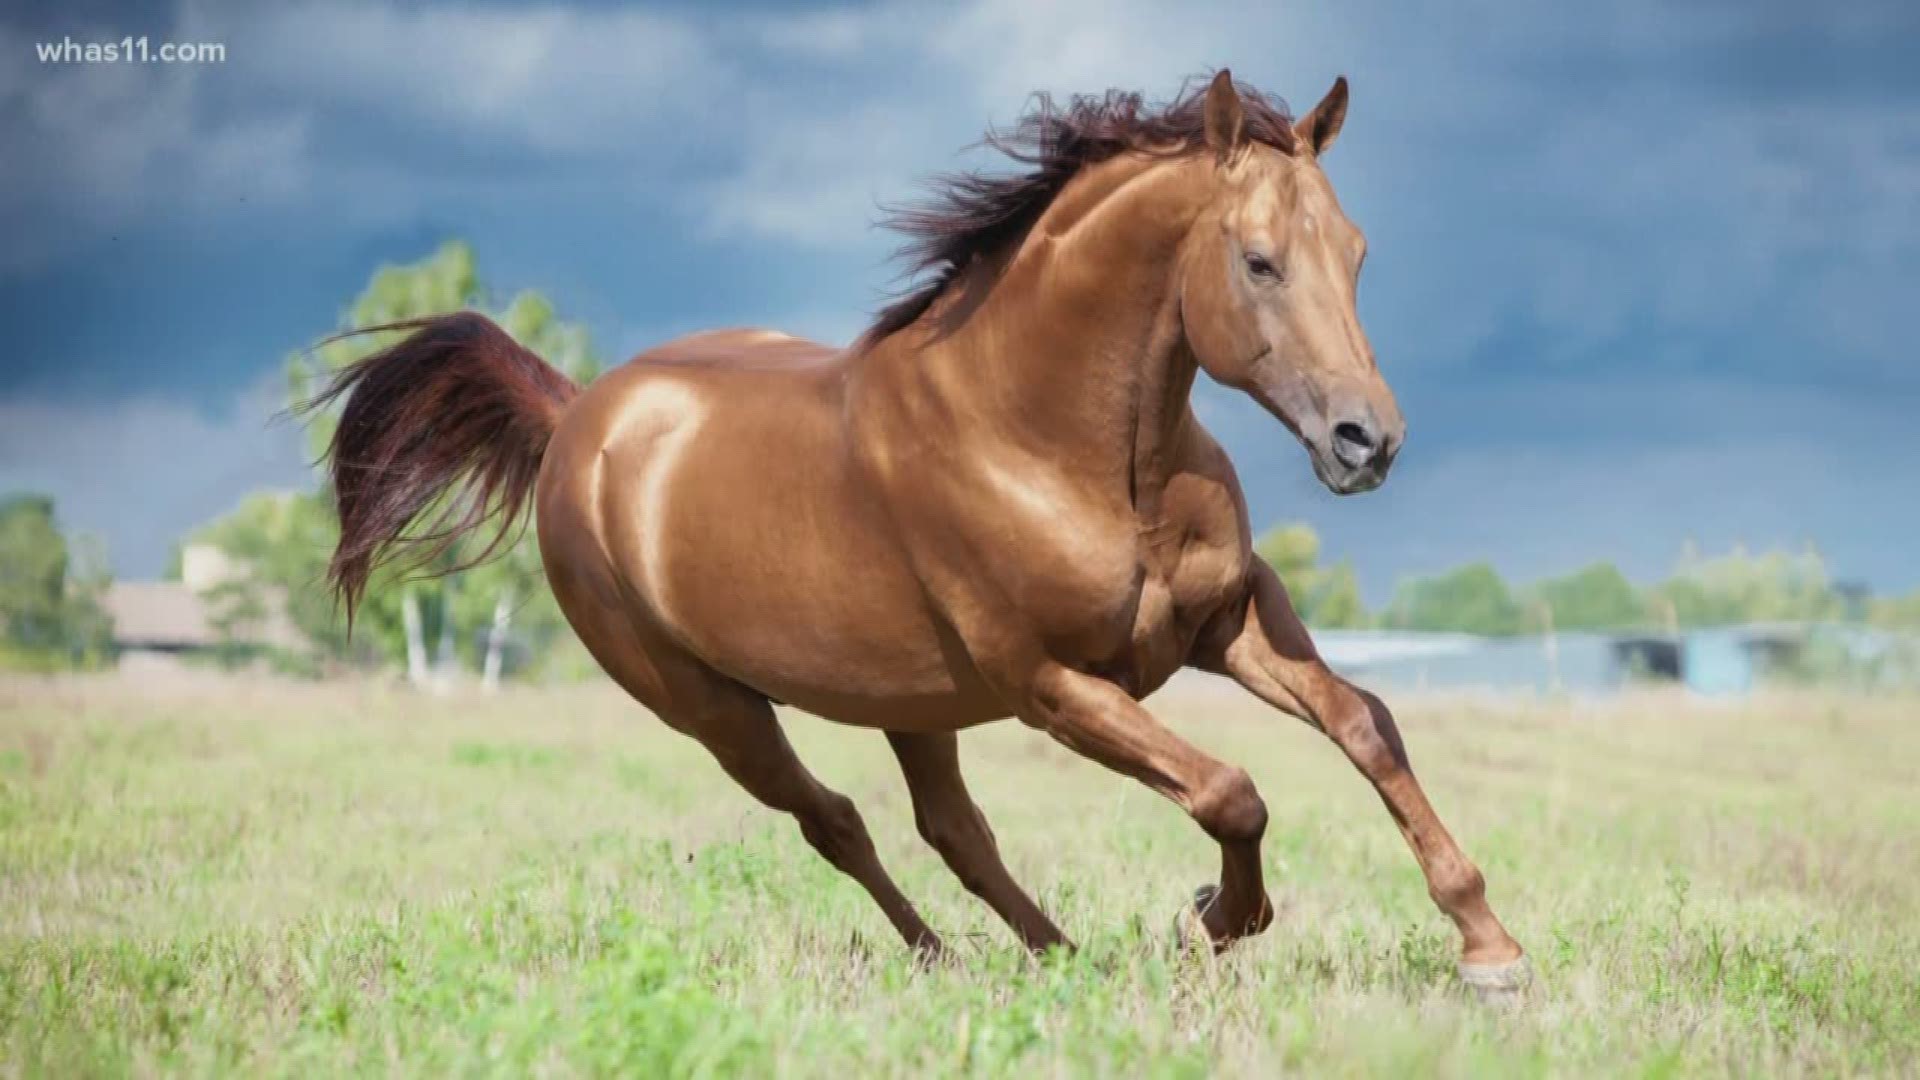 Do horses with broken legs have to be euthanized?